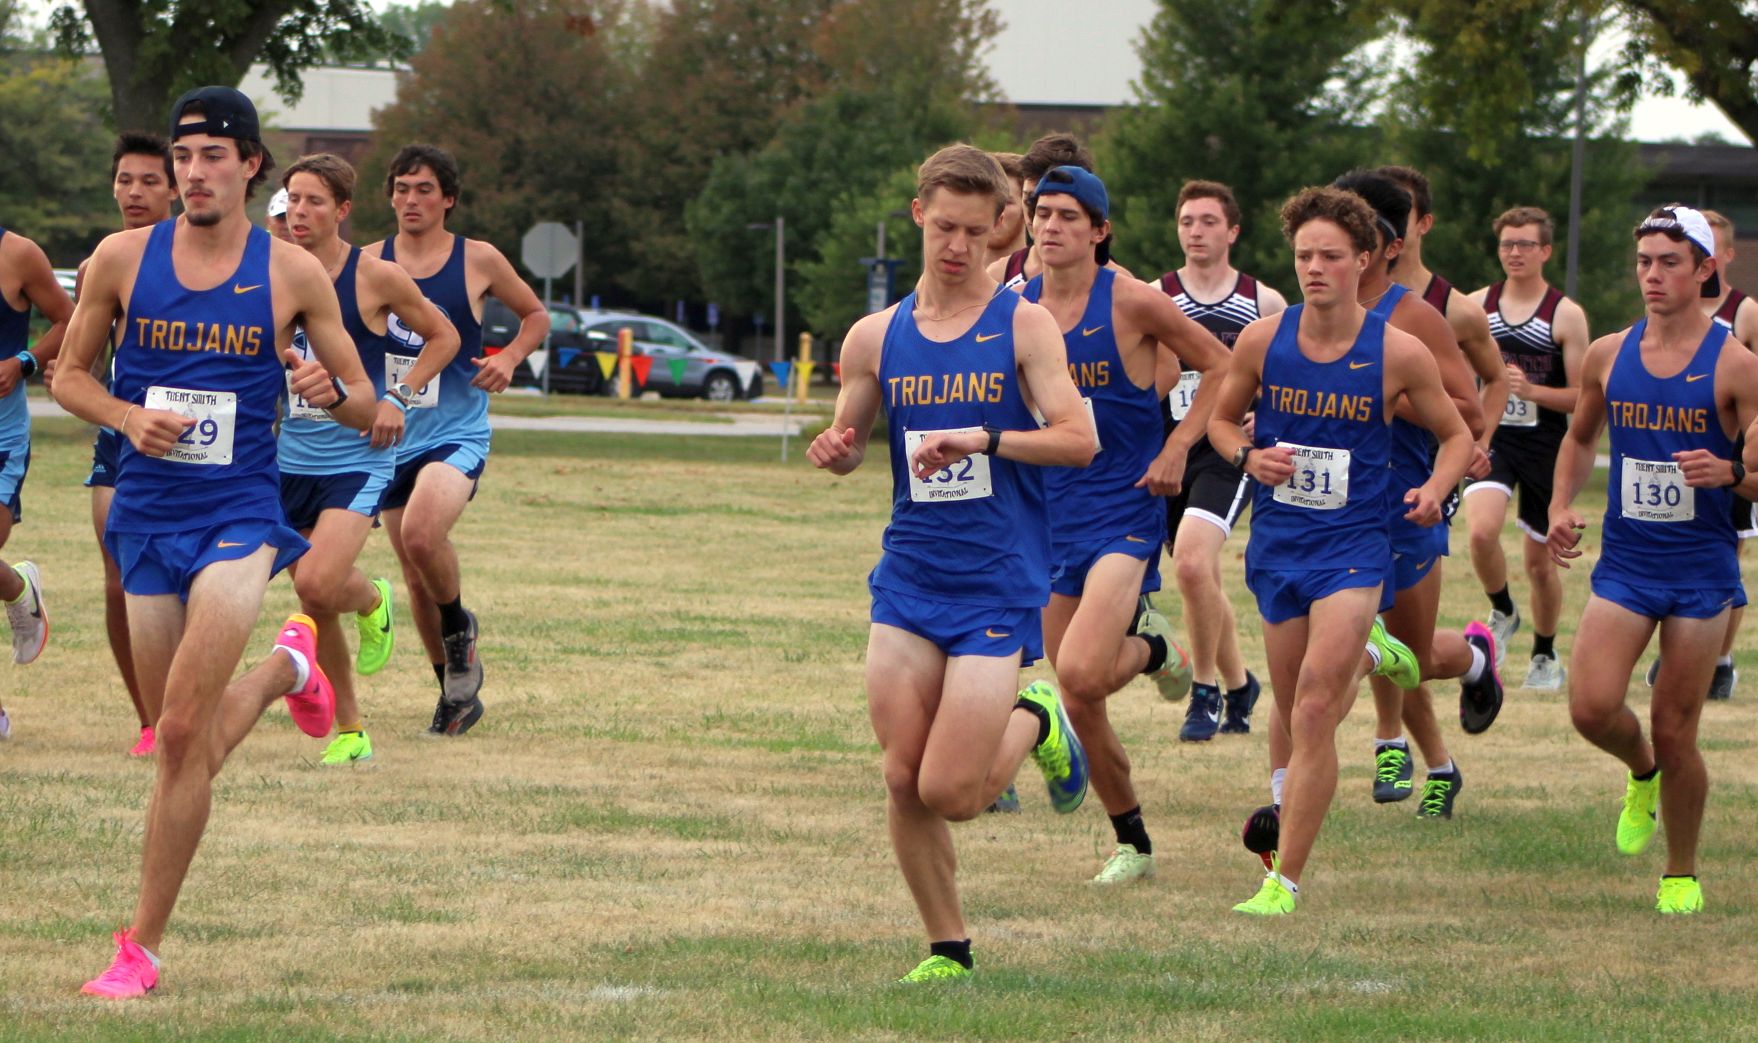 The NIACC men's cross country team is ranked 13th in latest USTFCCCA NJCAA Division II rankings.